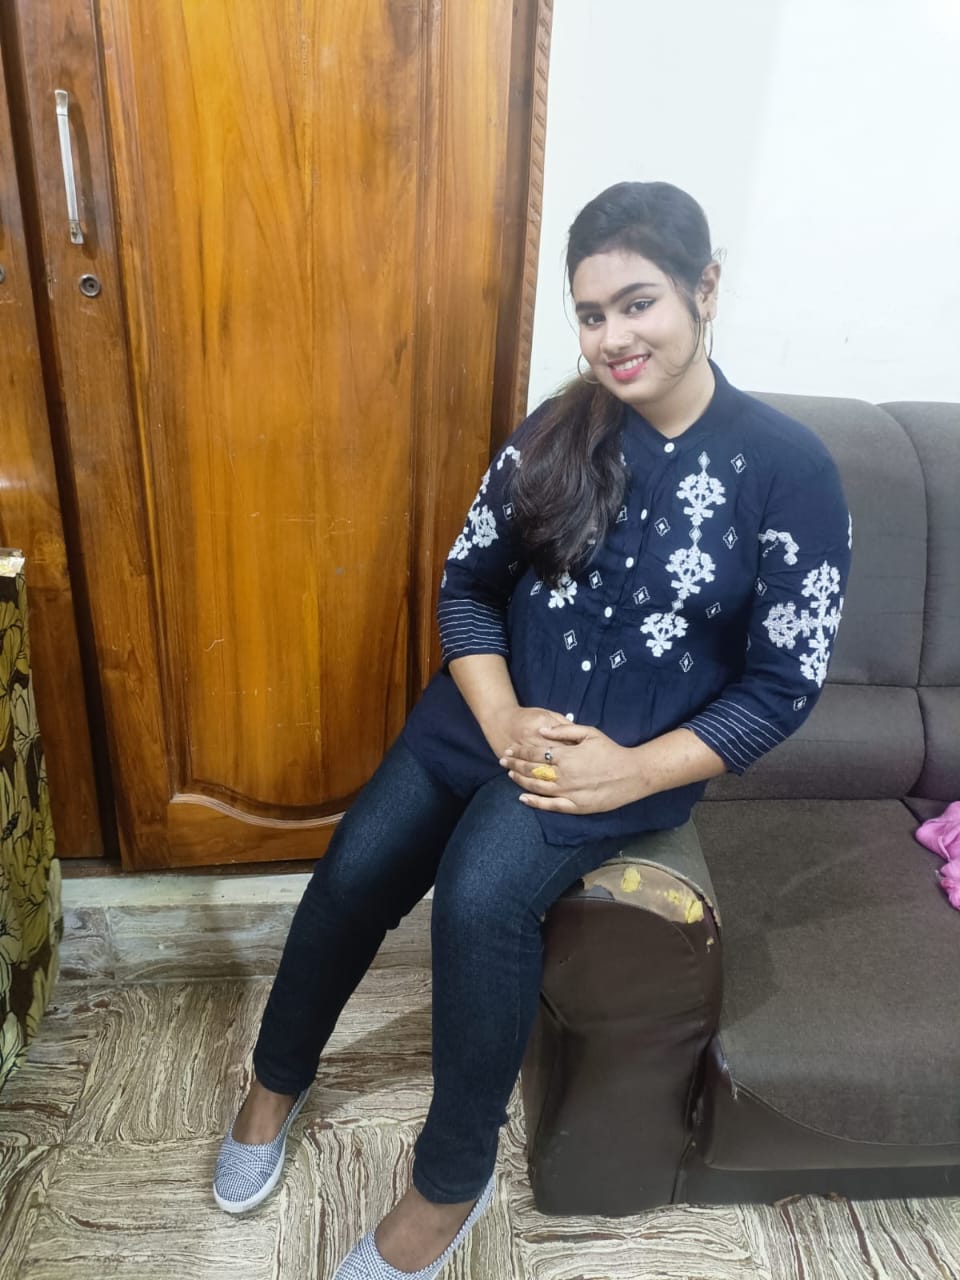 call girl reena shot 3000 winter hot service available in visakhapatnam